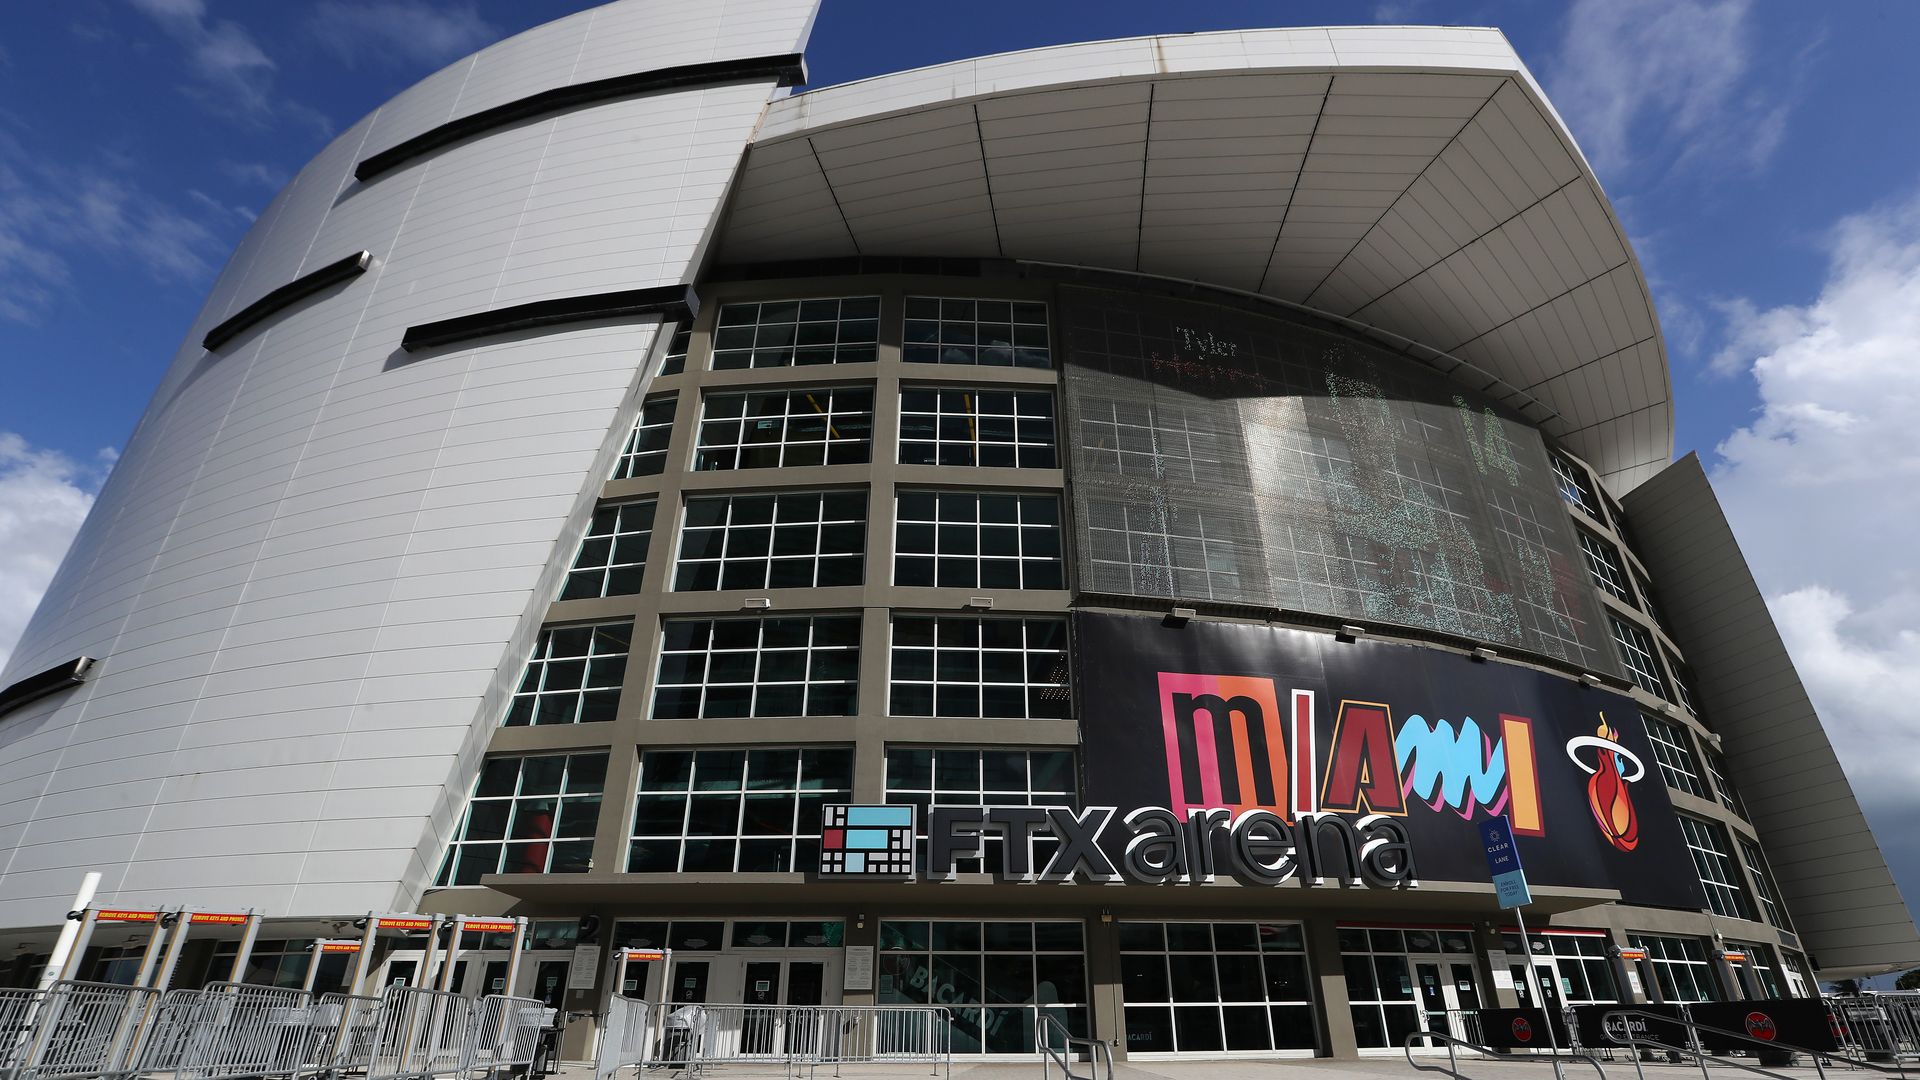 An exterior view of FTX Arena prior to a game between the Boston Celtics and Miami Heat at FTX Arena on October 21, 2022 in Miami, Florida.